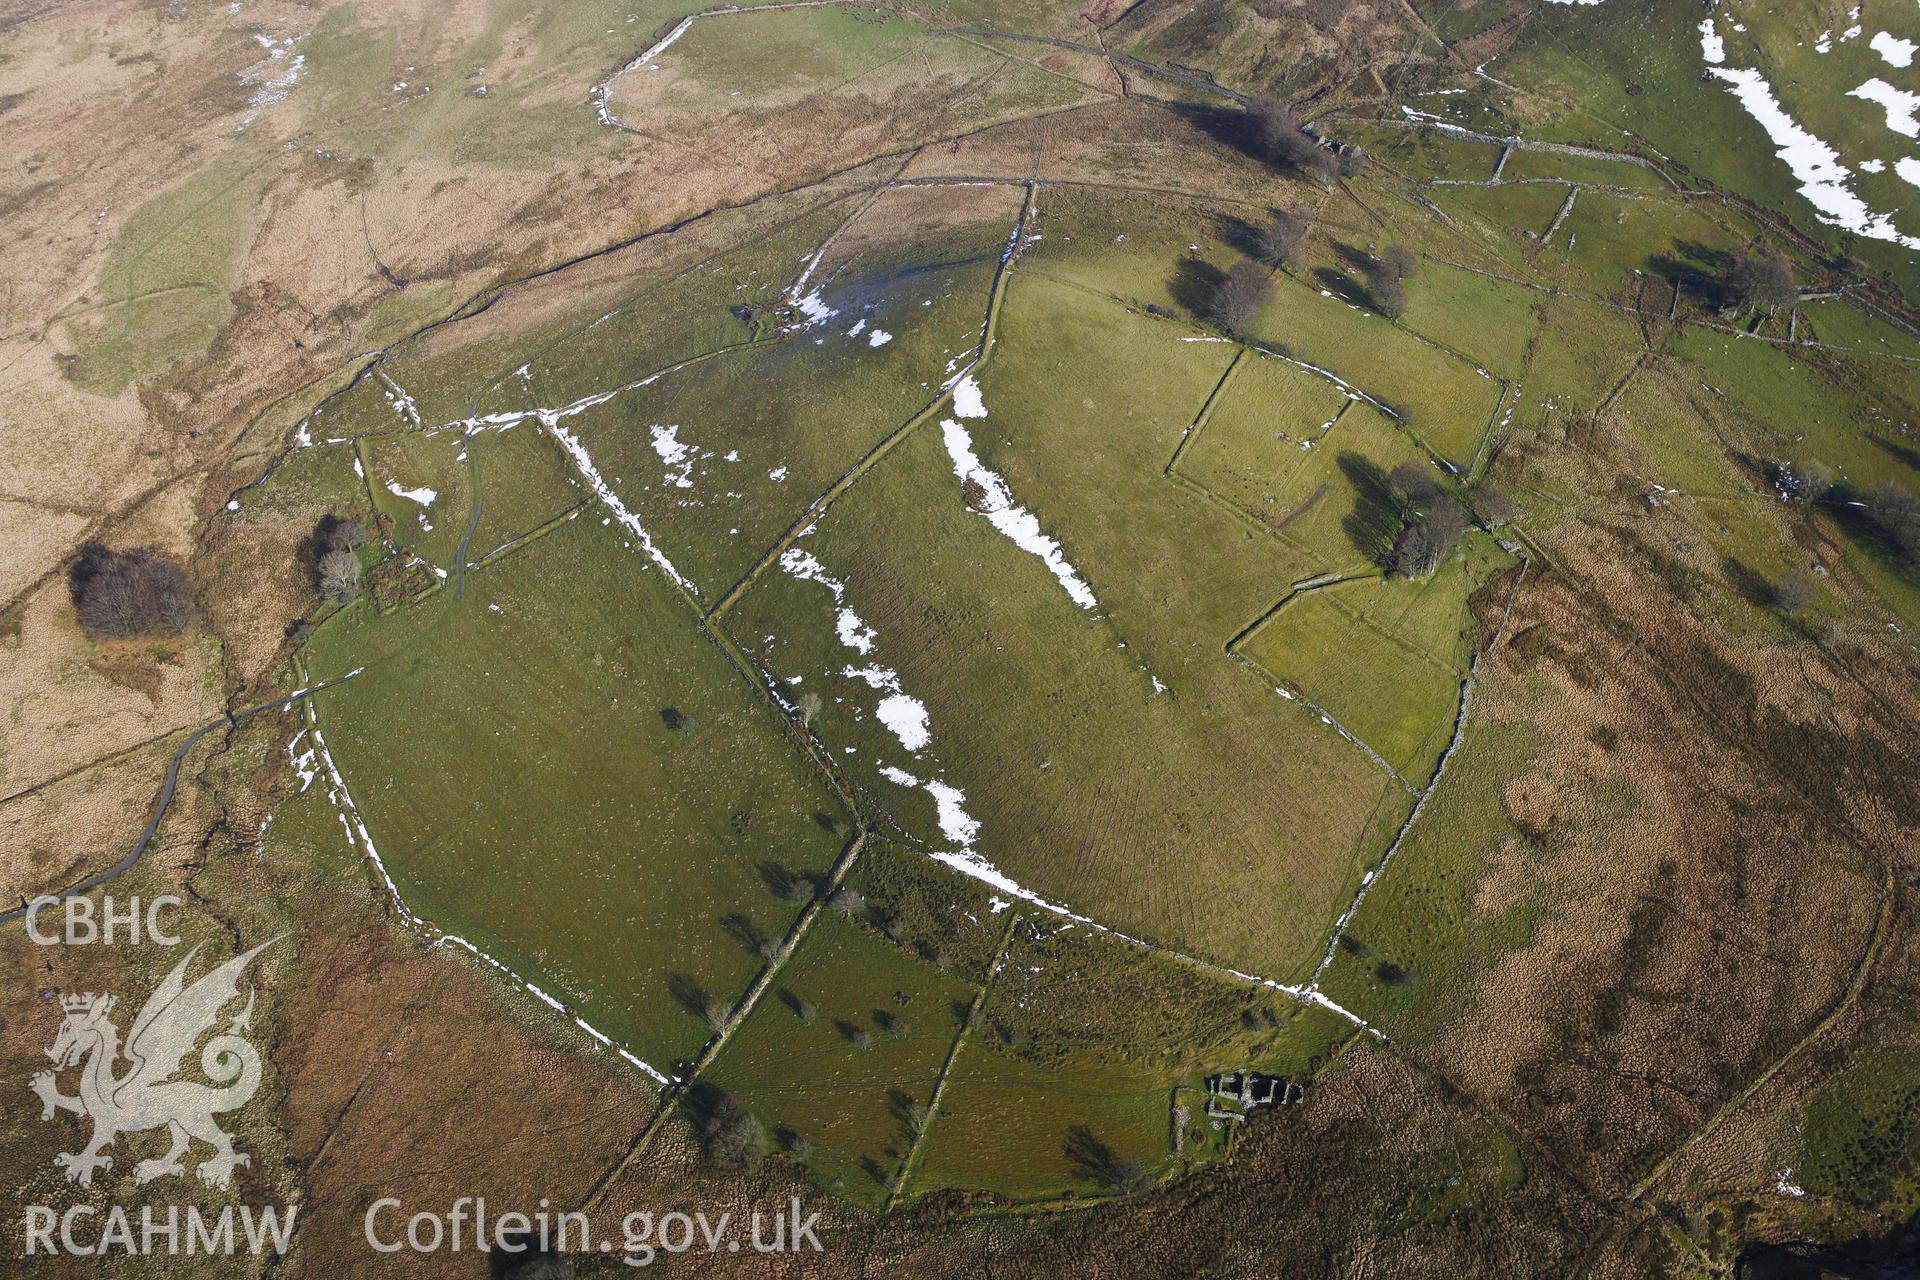 RCAHMW colour oblique photograph of Gwar Ffynnon, Deserted Famsteads. Taken by Toby Driver on 07/02/2012.